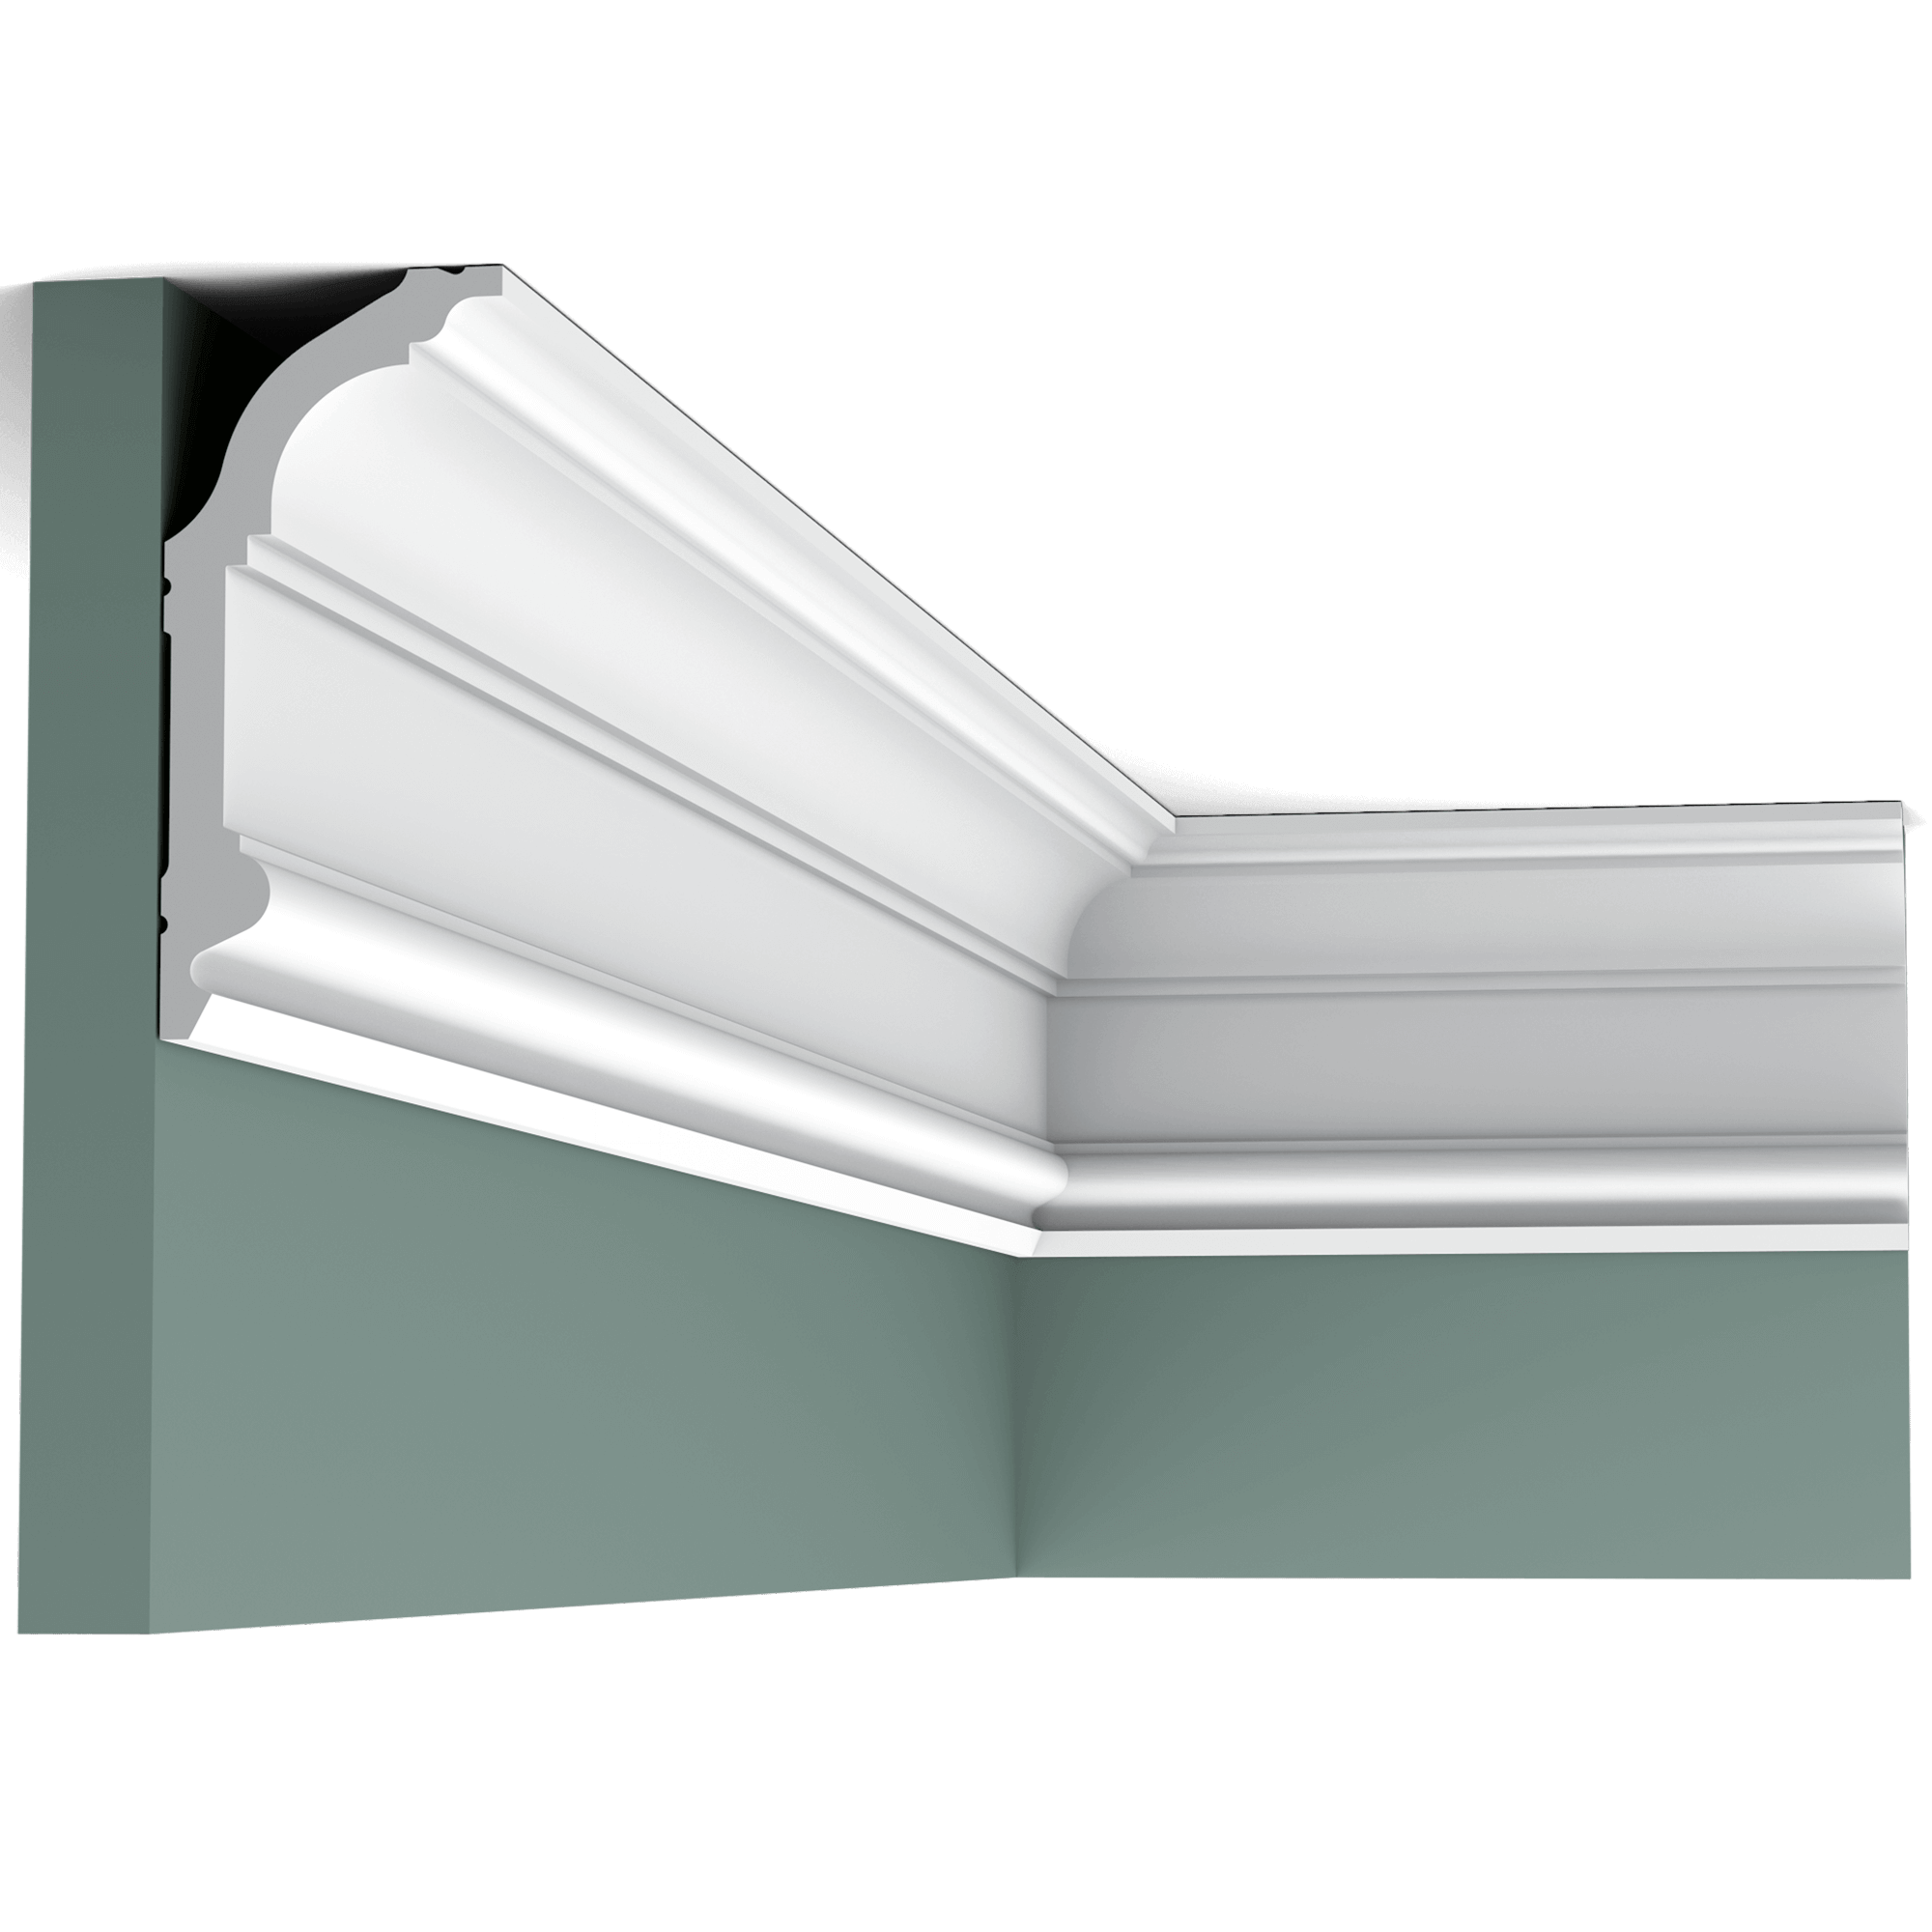 c339 cornice moulding 5520 The linear design of this classic Cotswold cornice moulding is at home in almost any interior.